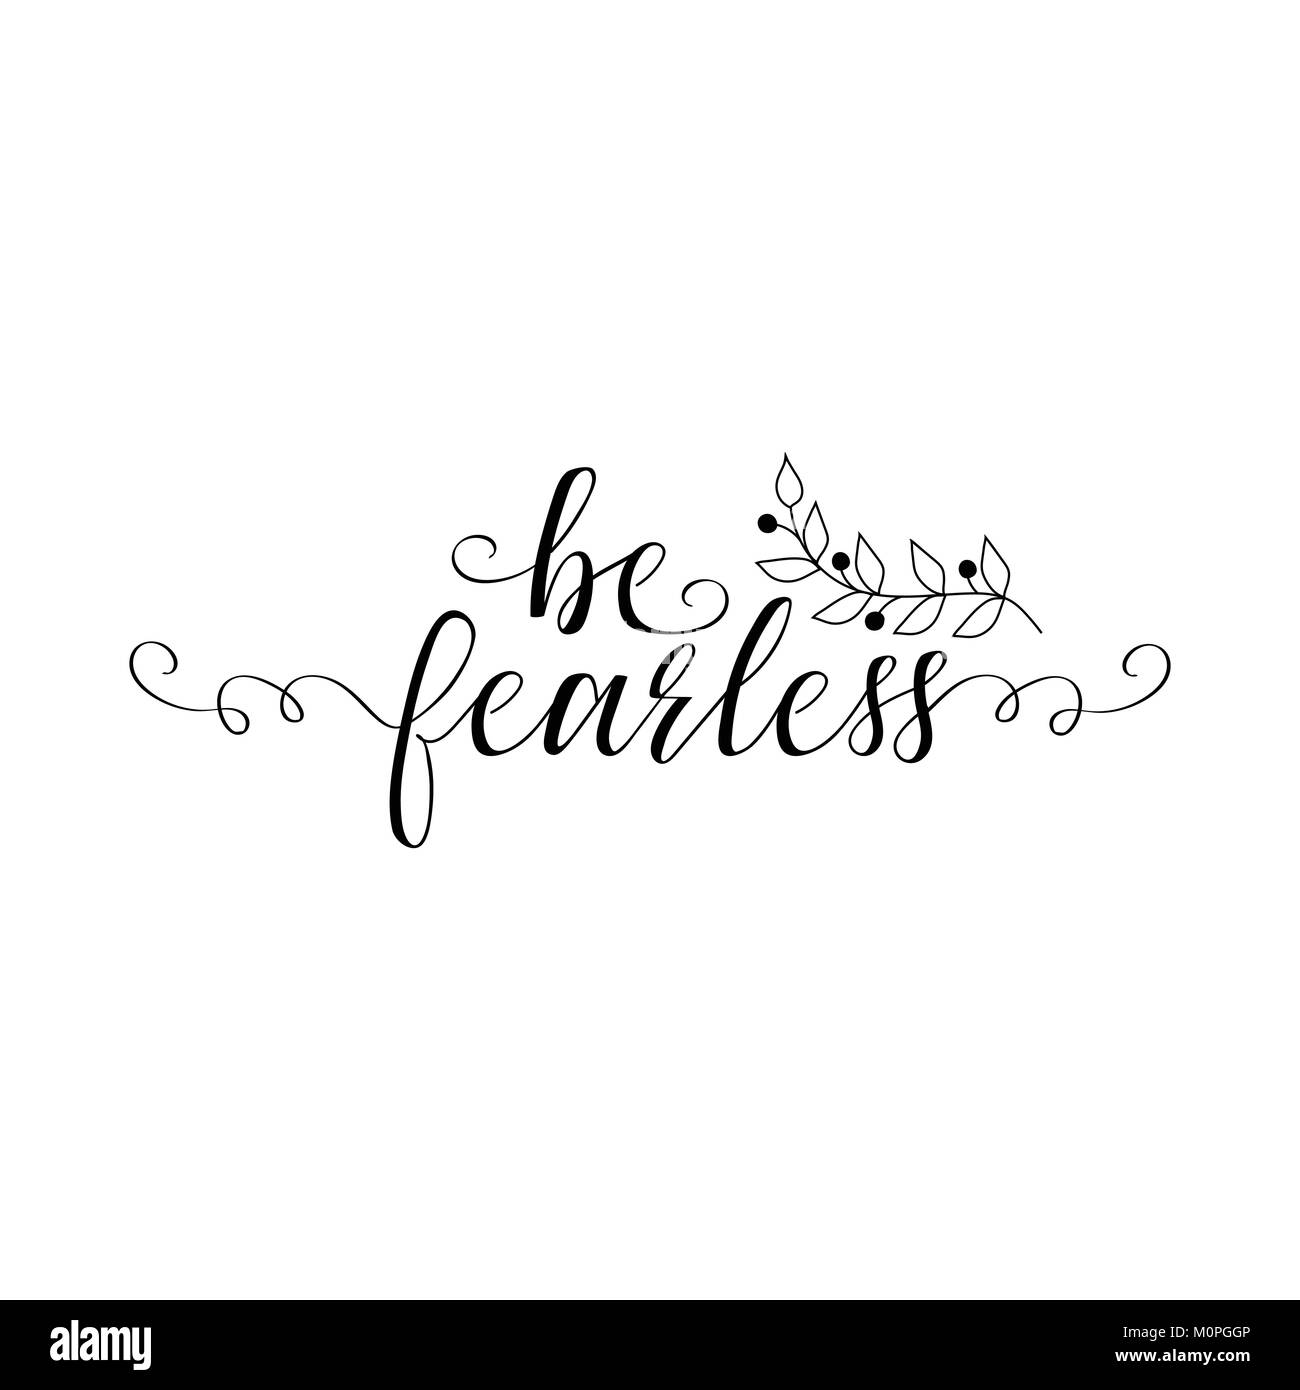 https://c8.alamy.com/comp/M0PGGP/be-fearless-quote-lettering-calligraphy-inspiration-graphic-design-M0PGGP.jpg